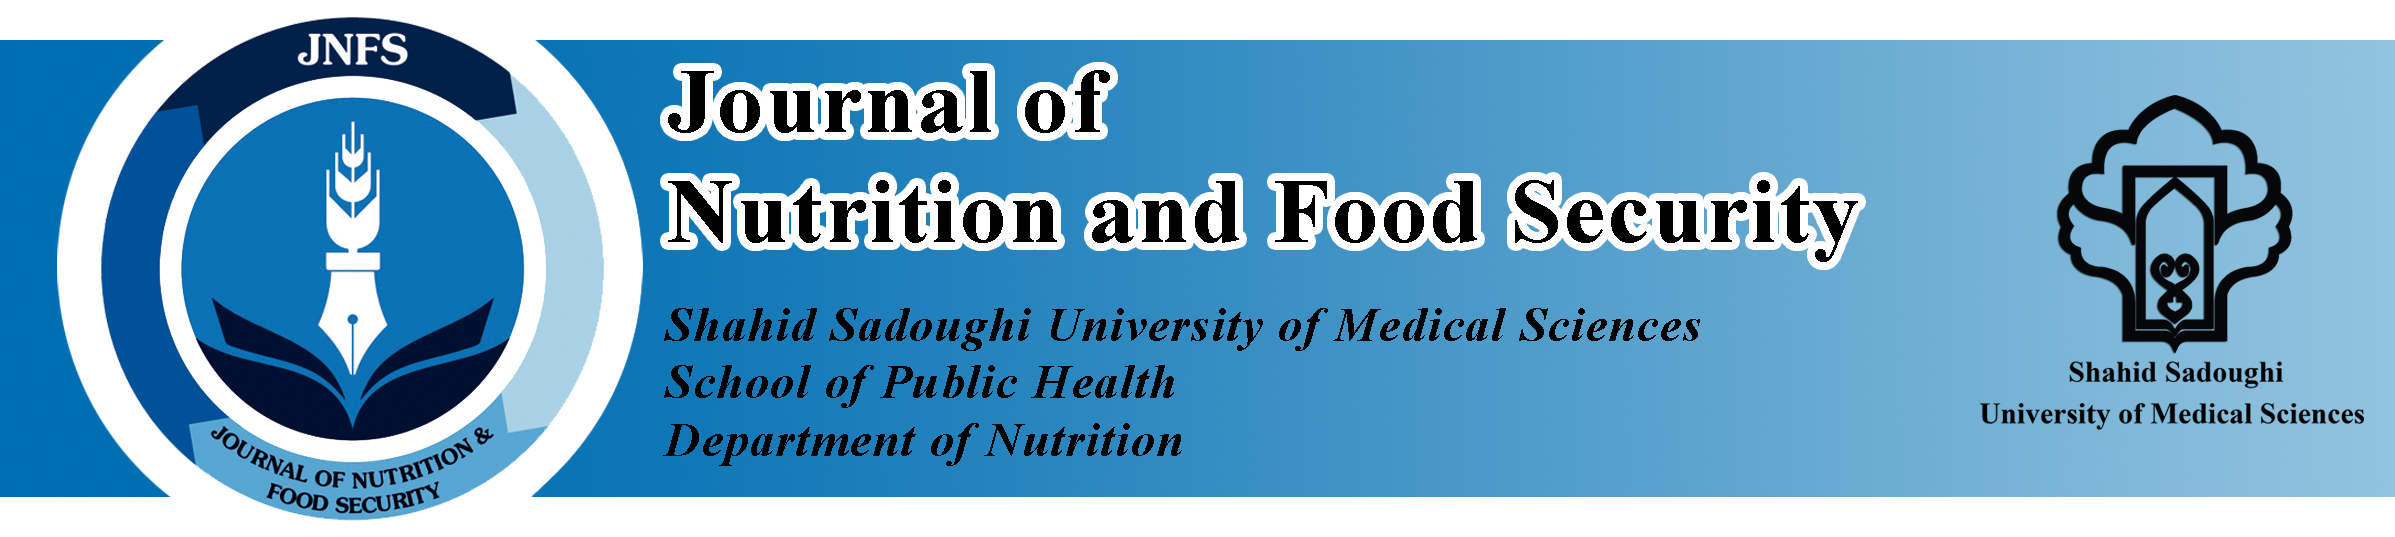 Journal of Nutrition and Food Security